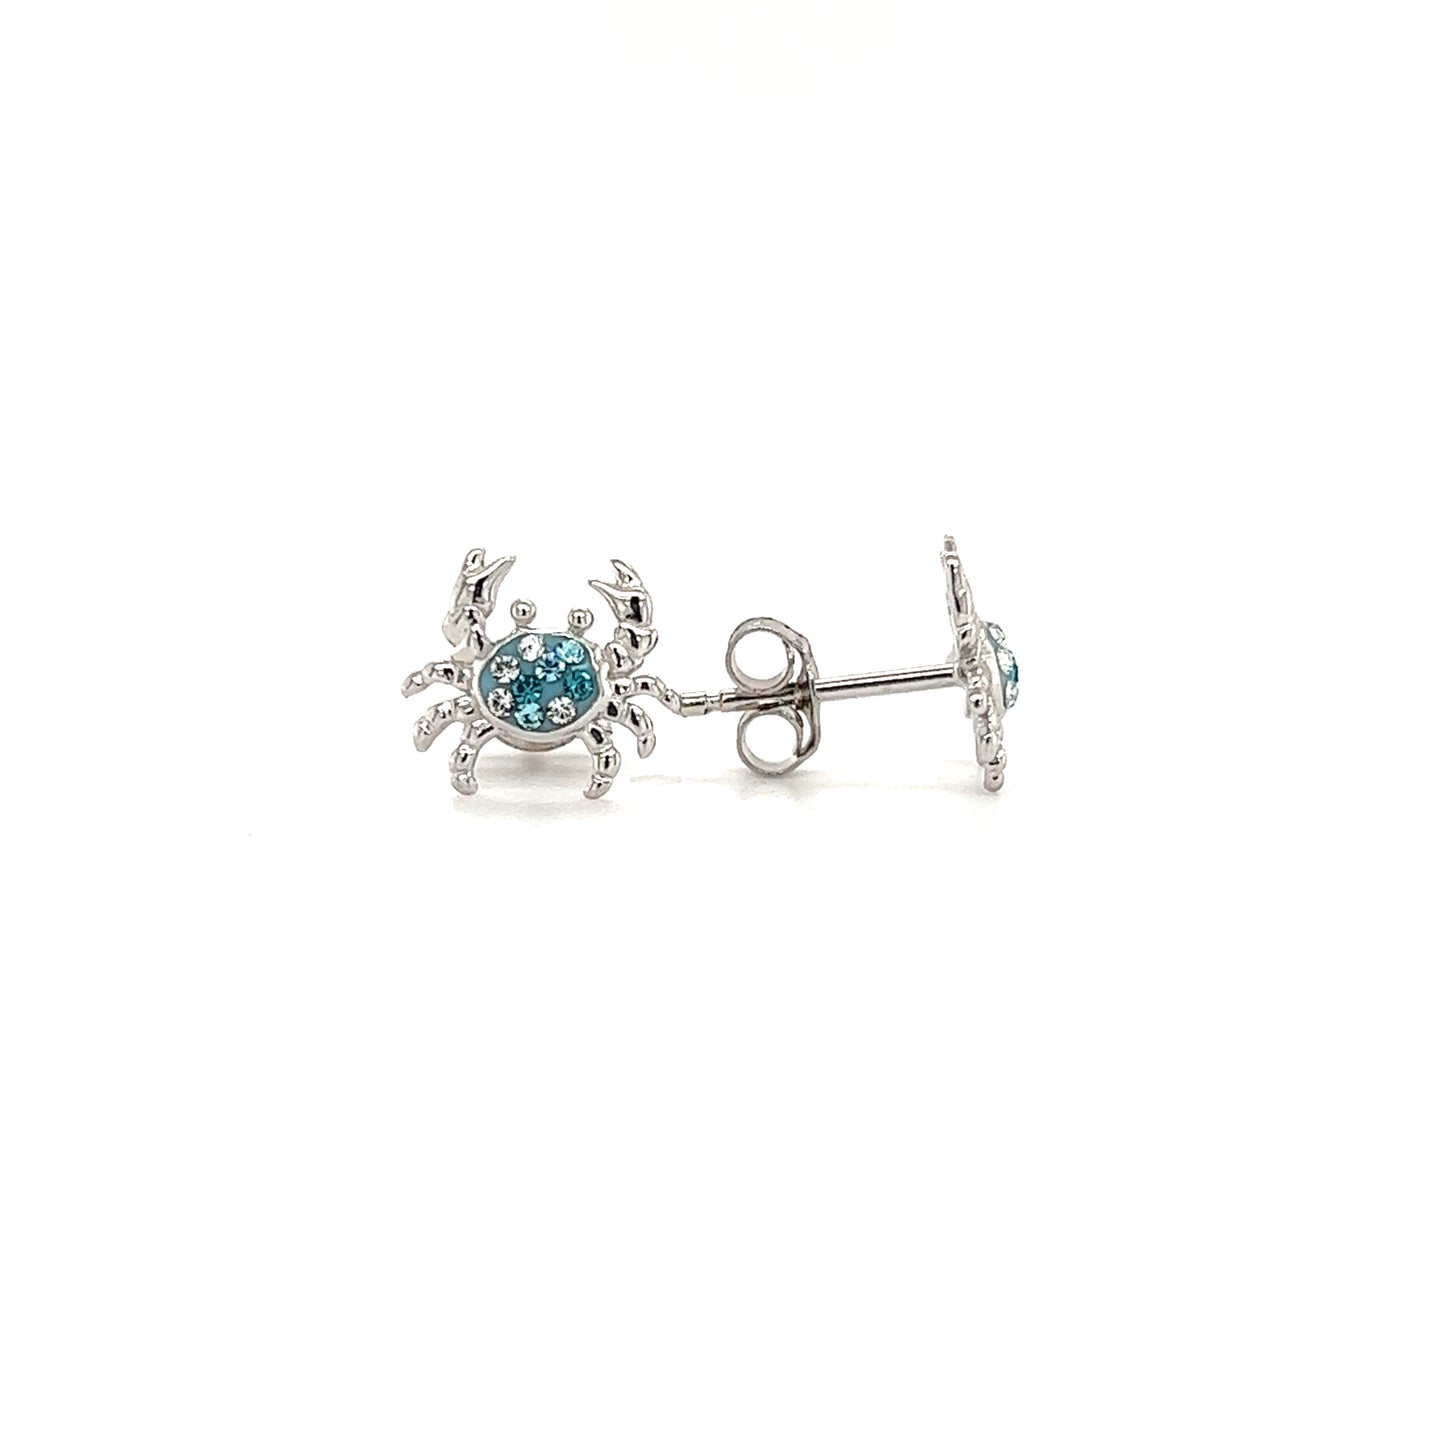 Blue Crab Stud Earrings with Aqua and White Crystals in Sterling Silver Front and Side View